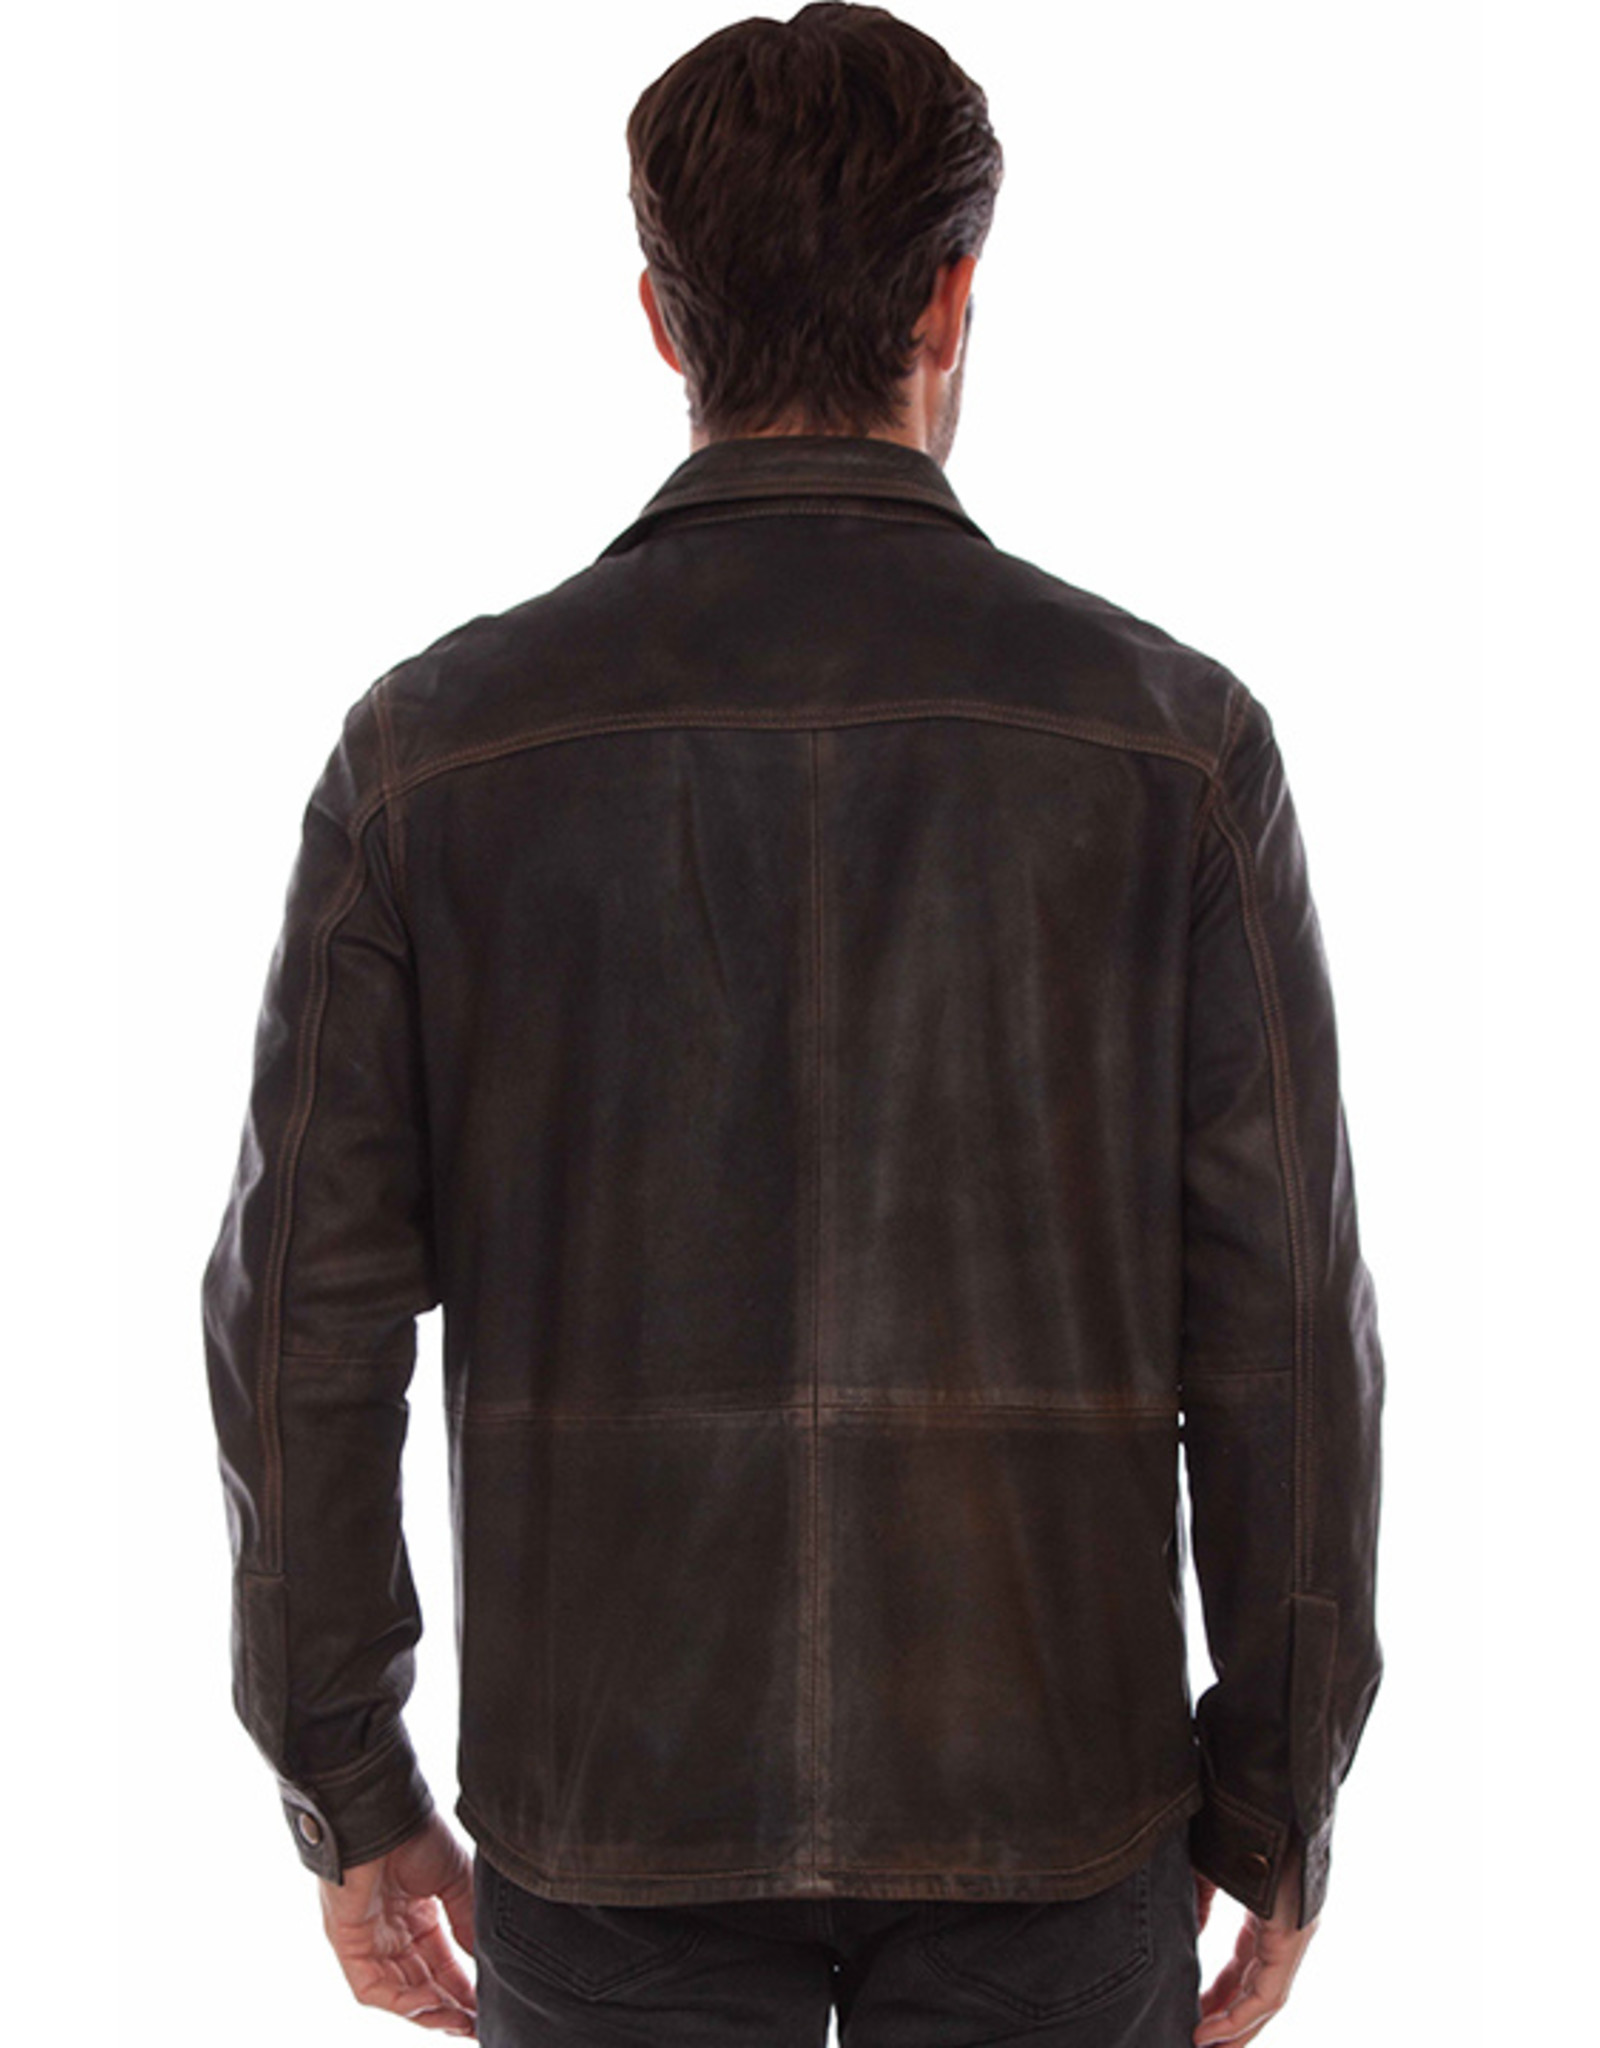 Scully Leather Jacket - Blanton-Caldwell